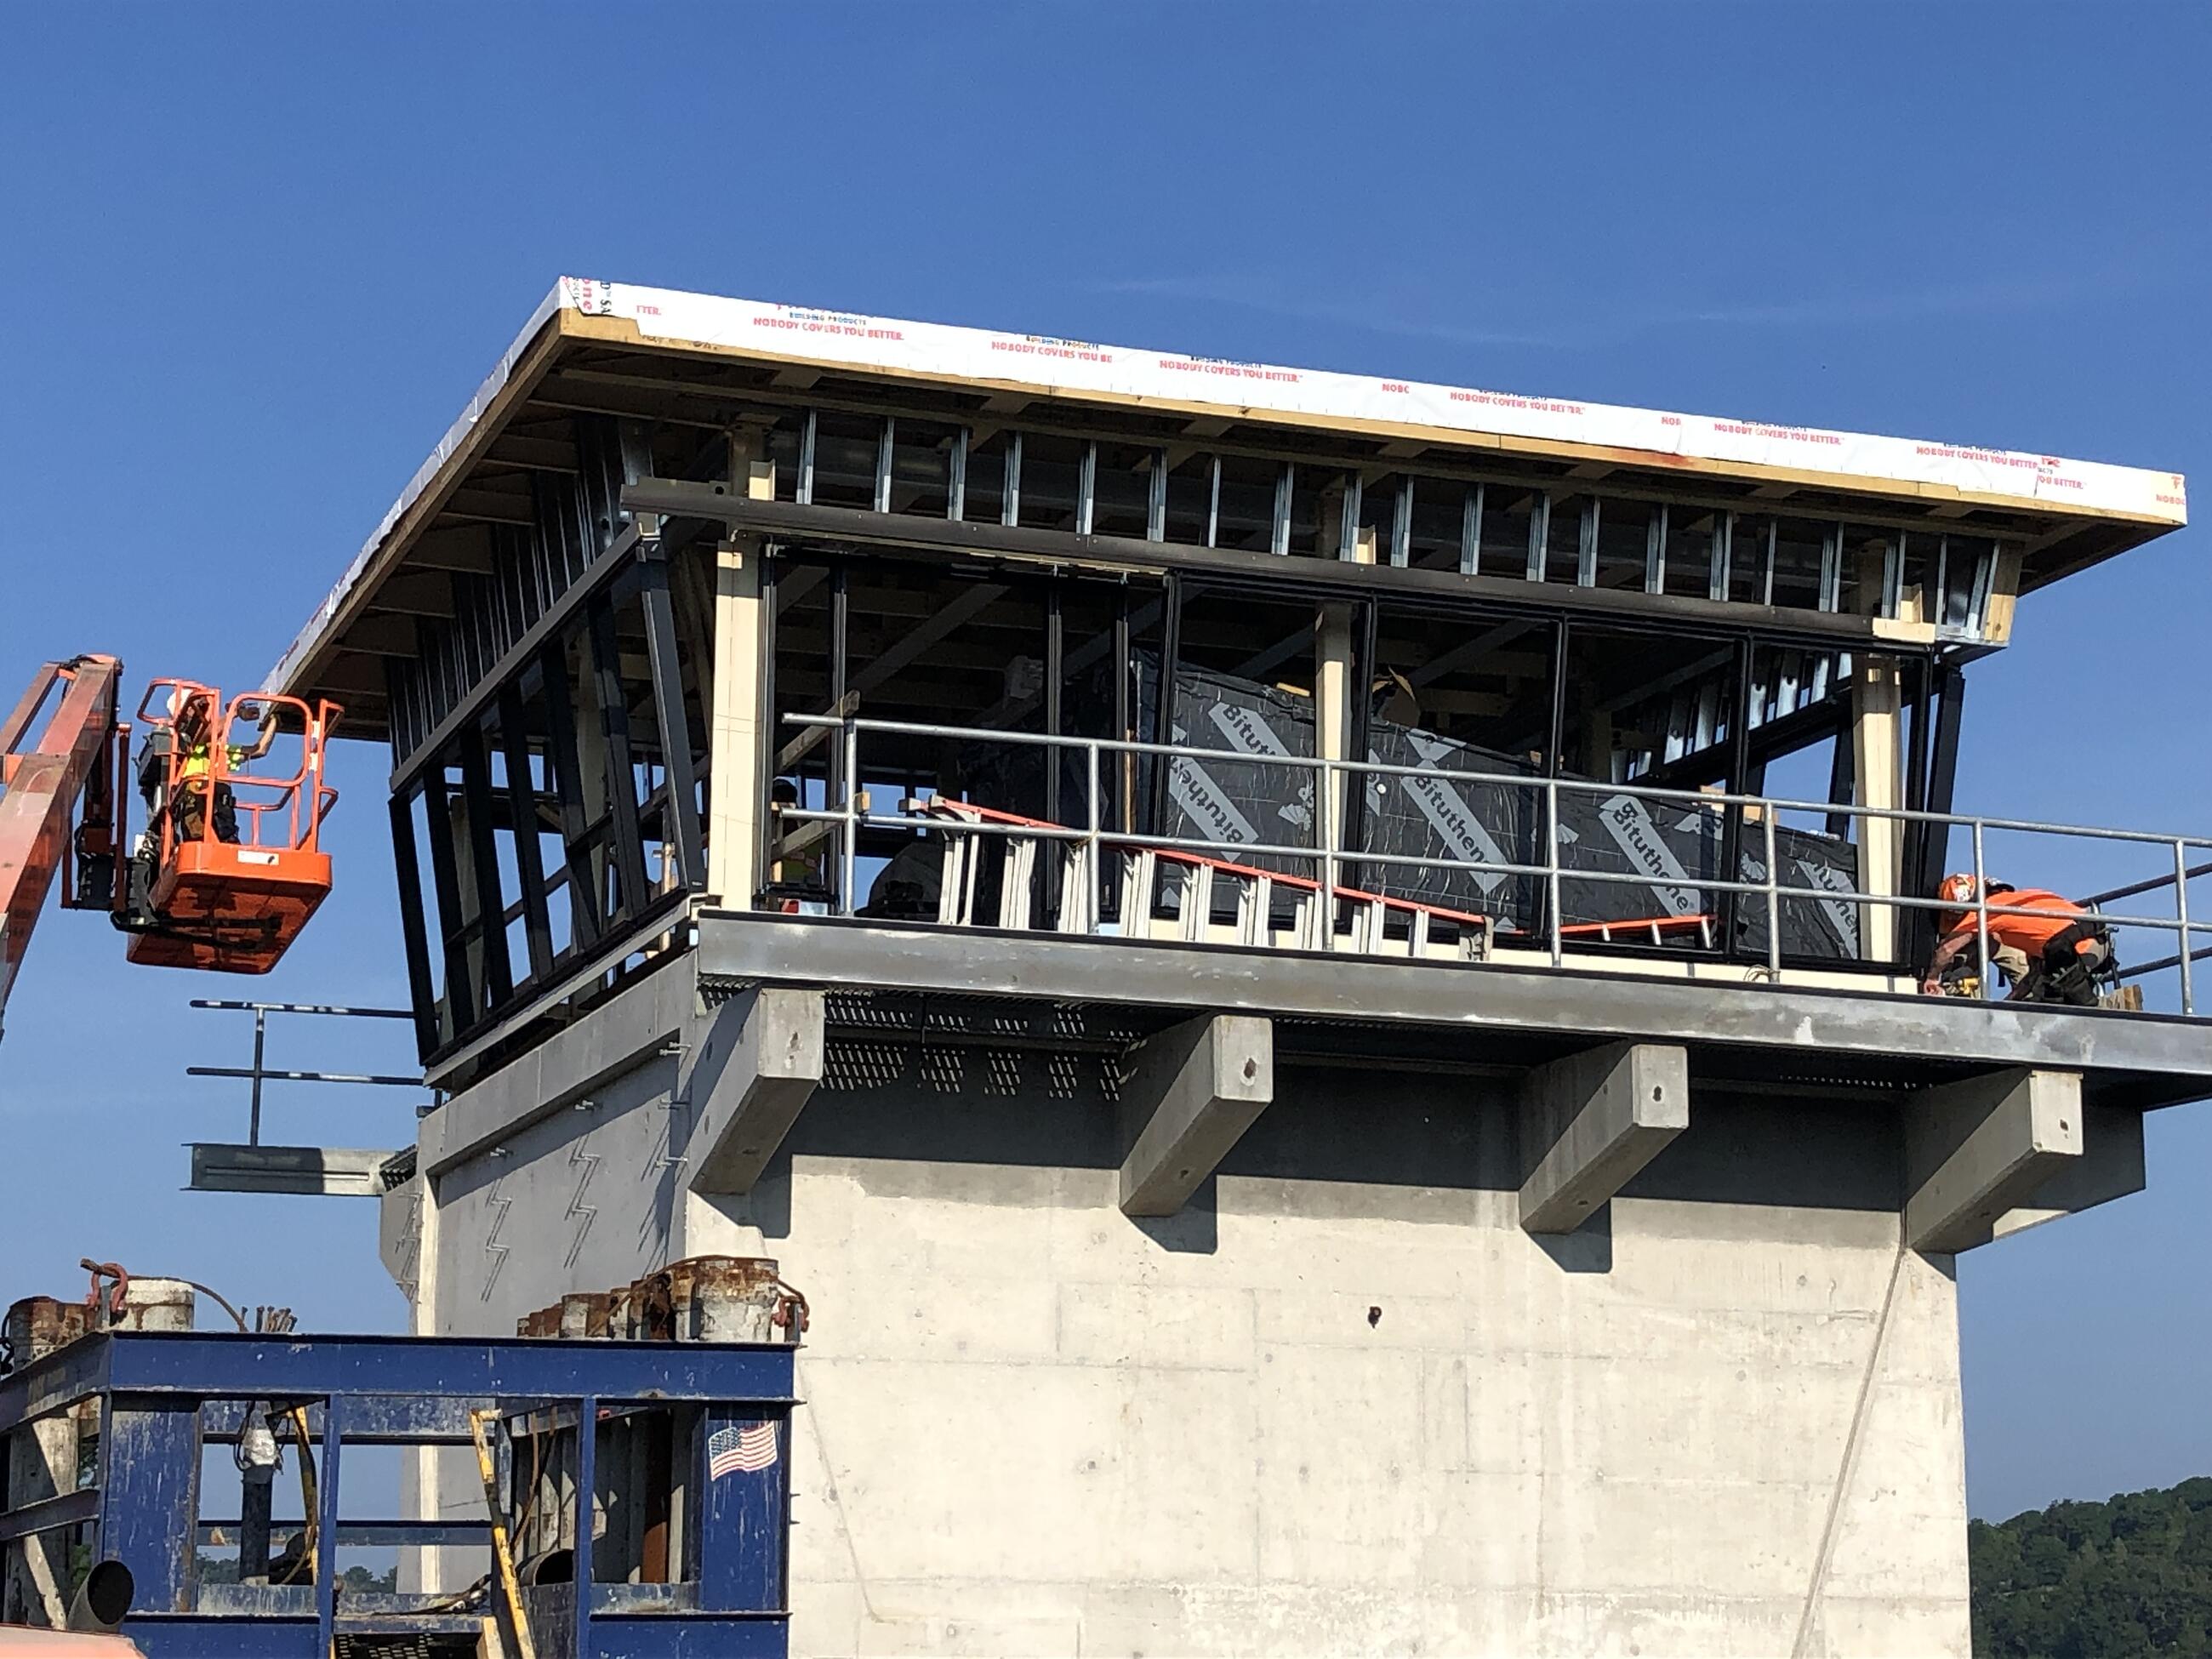 The control tower is shown under construction. A worker kneels on the floor of the observation deck, and another worker is in an orange aerial work platform alongside the observation deck at left. 